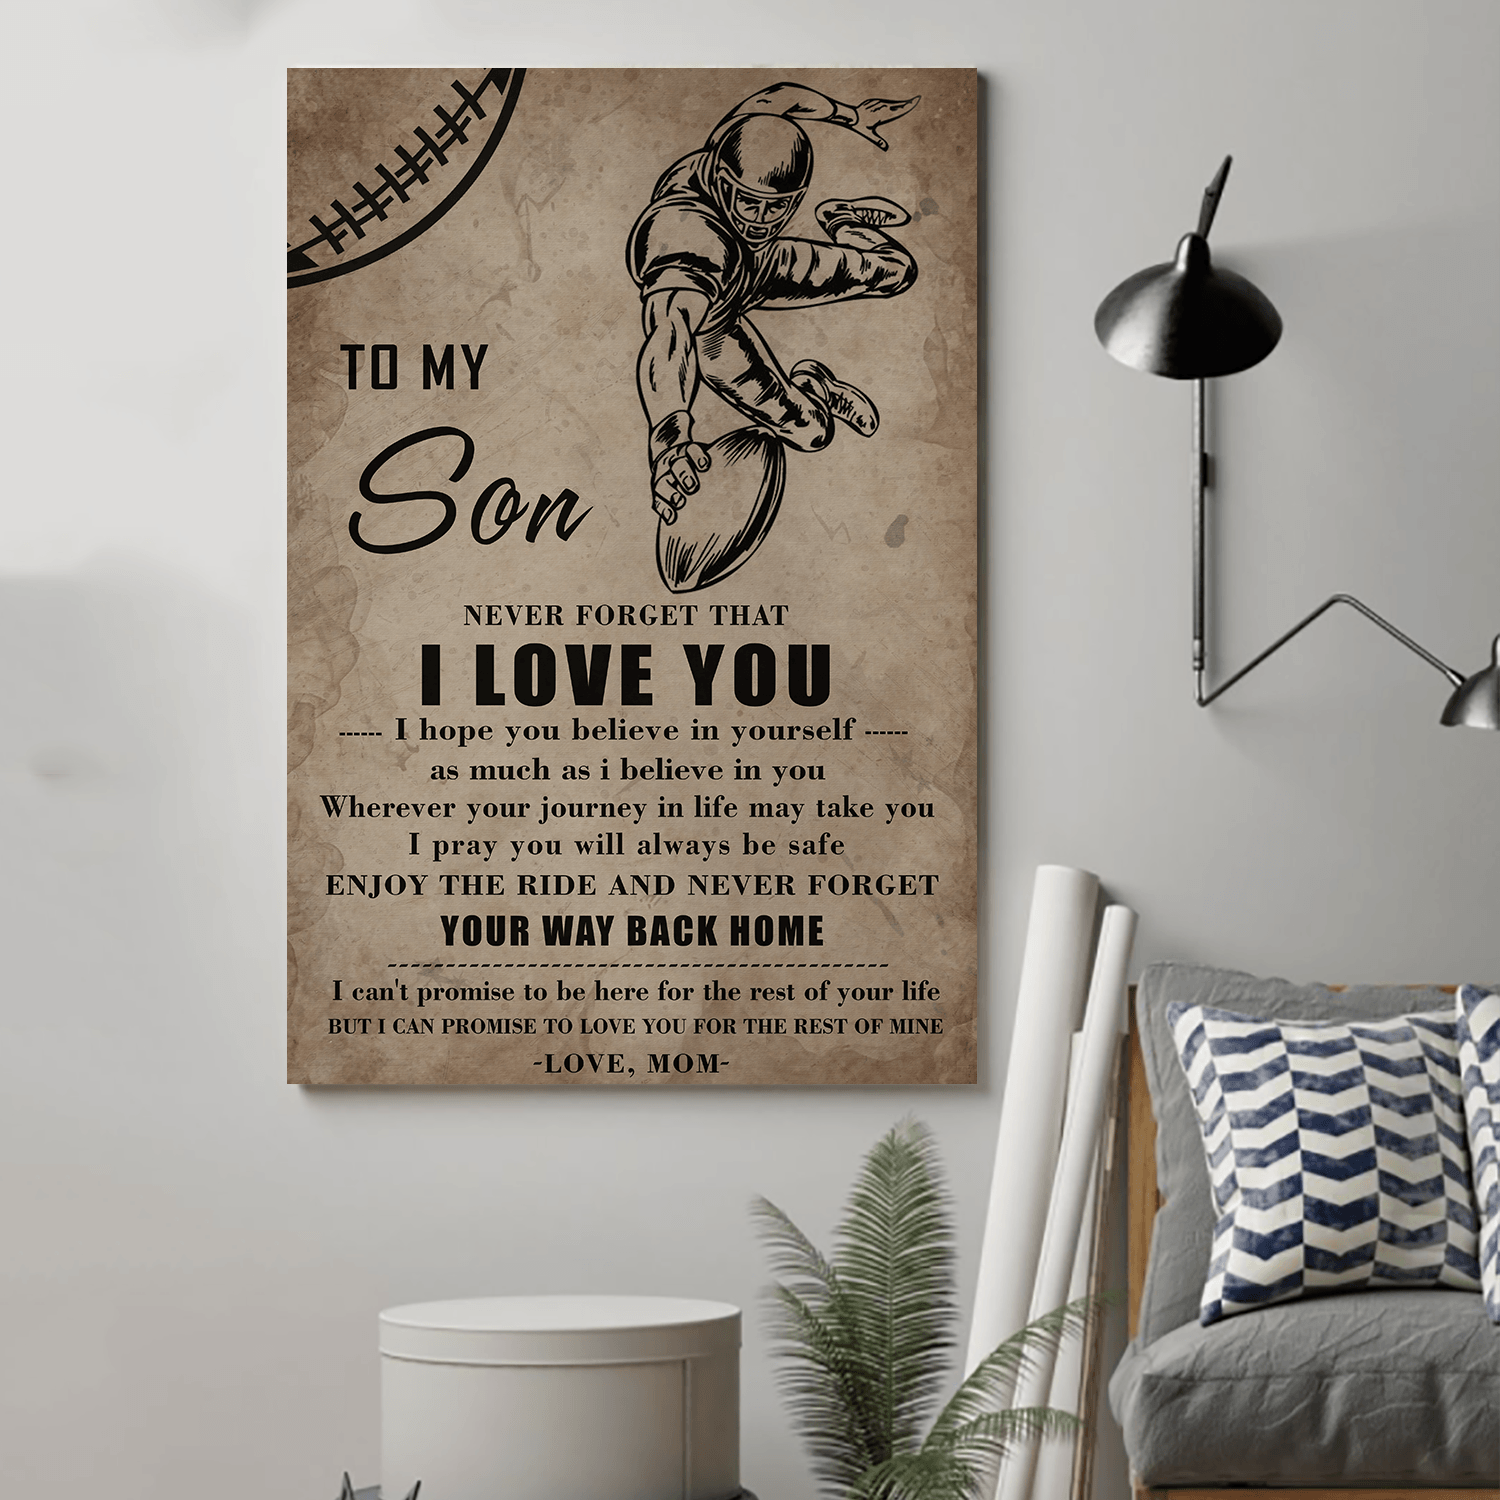 American football Canvas and Poster ��� son mom ��� never forget that wall decor visual art - GIFTCUSTOM